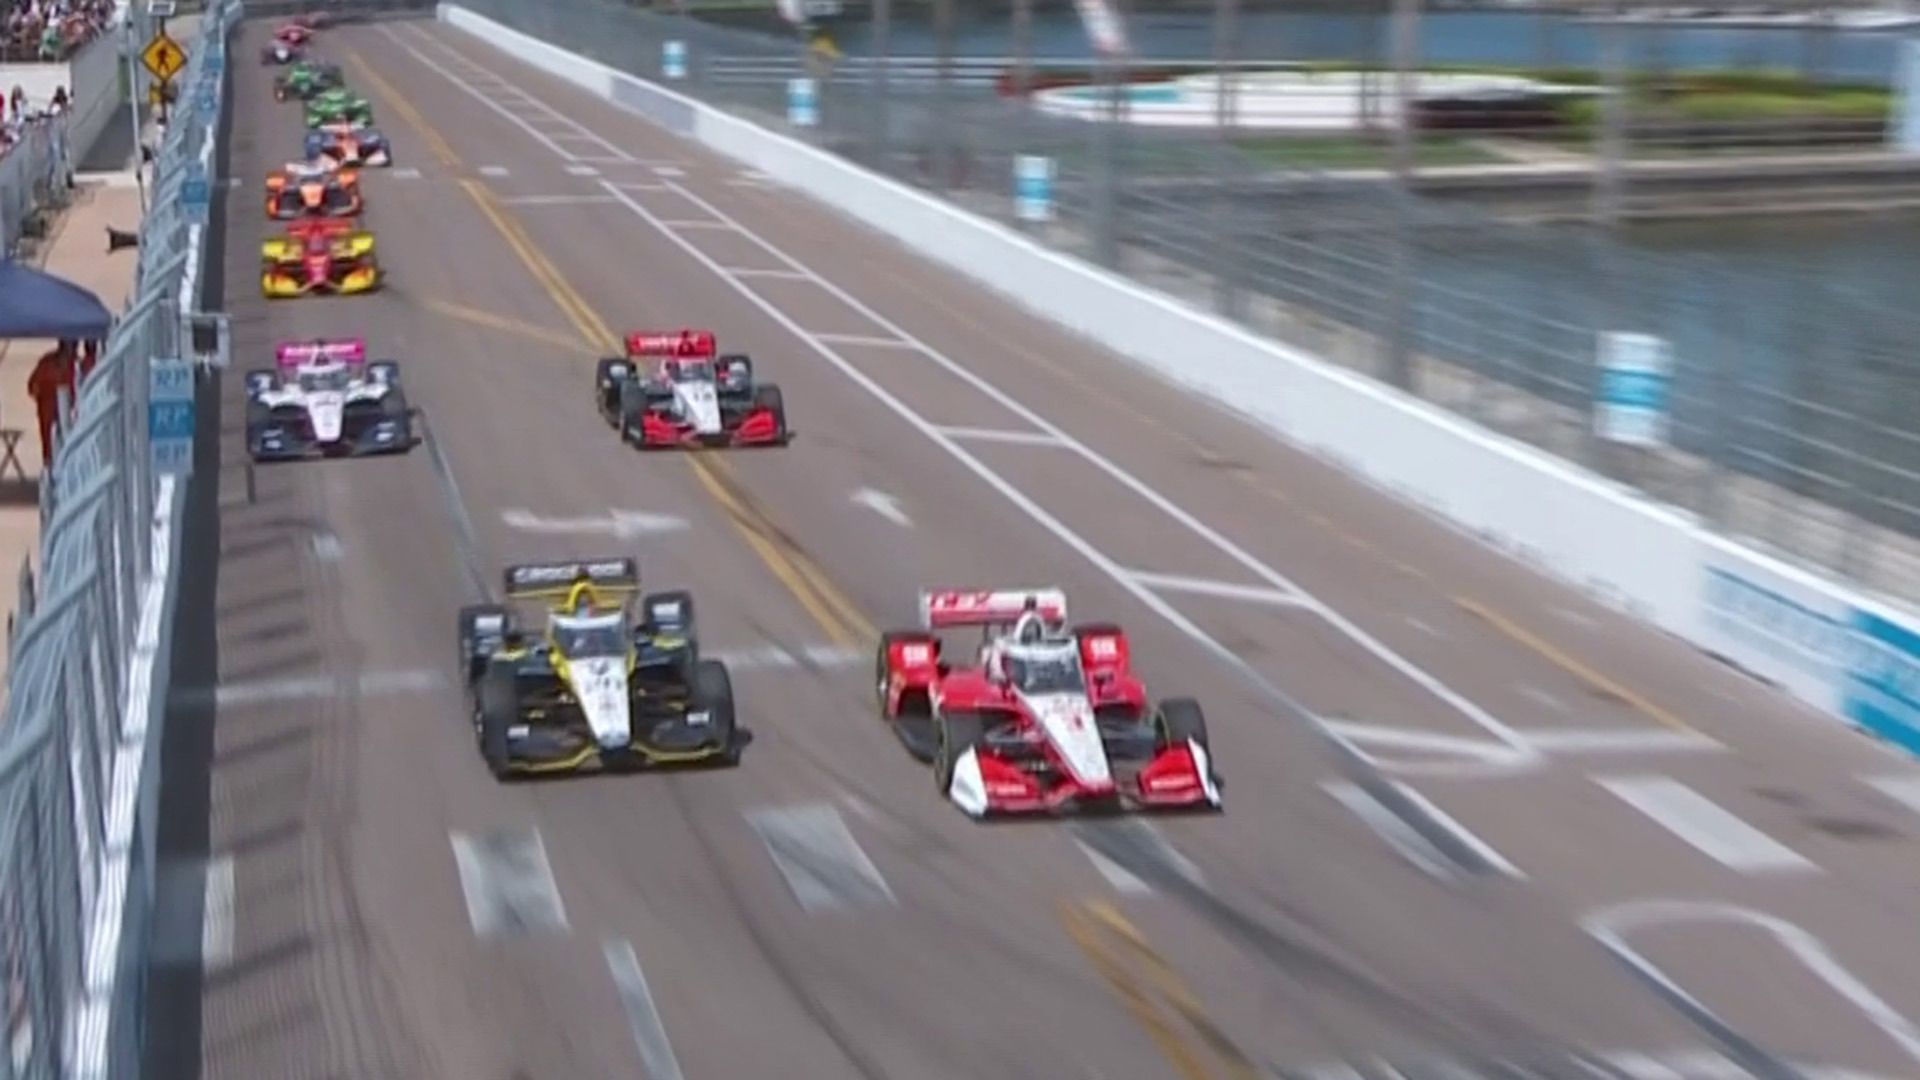 Scott McLaughlin passes Colton Herta for the final place on the podium at St Petersburg.